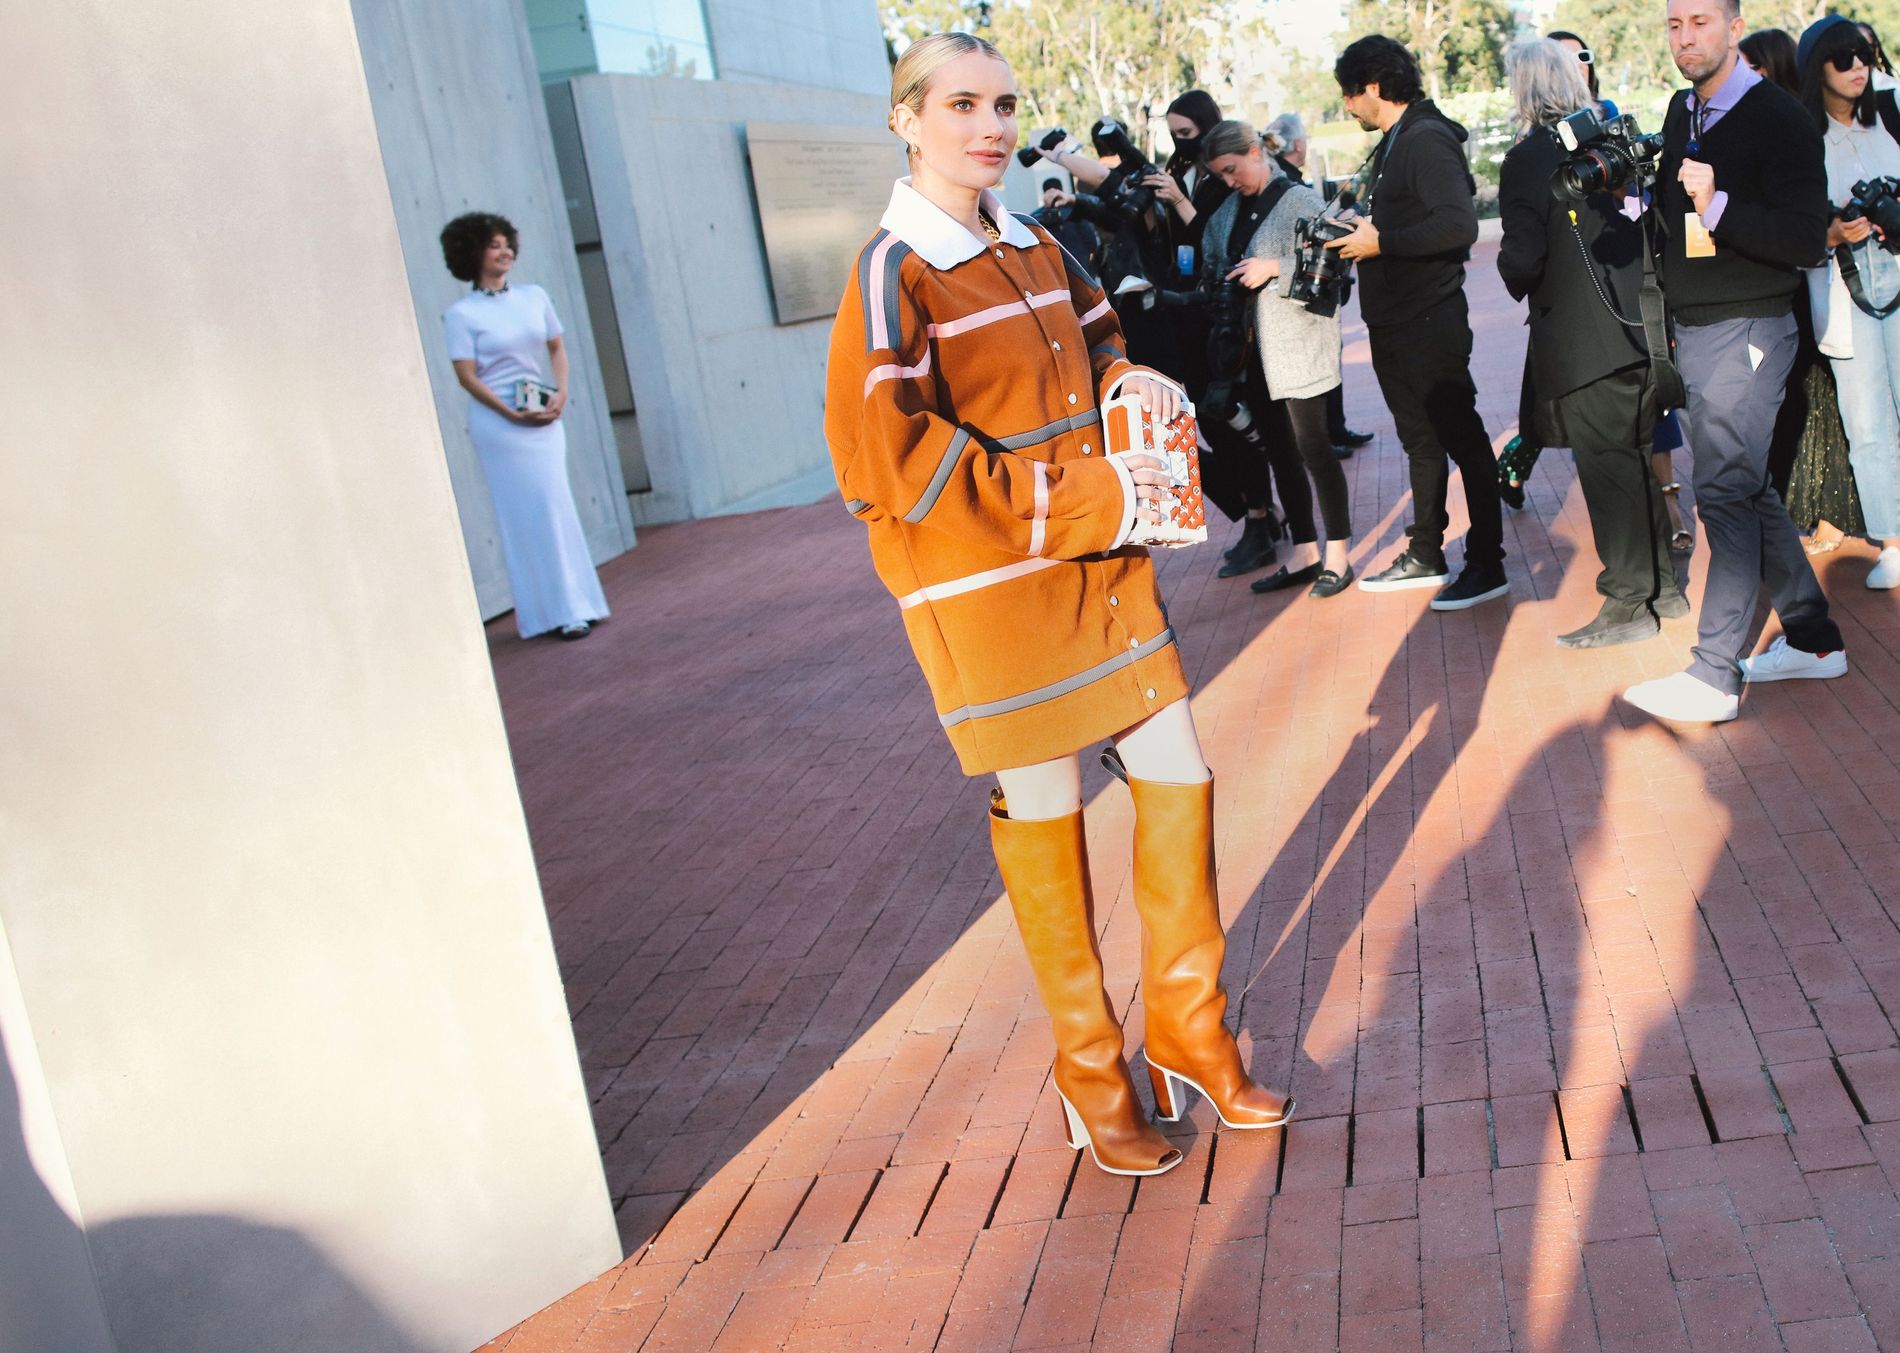 Knee-high boots are going nowhere according to street stylers - Vogue  Scandinavia